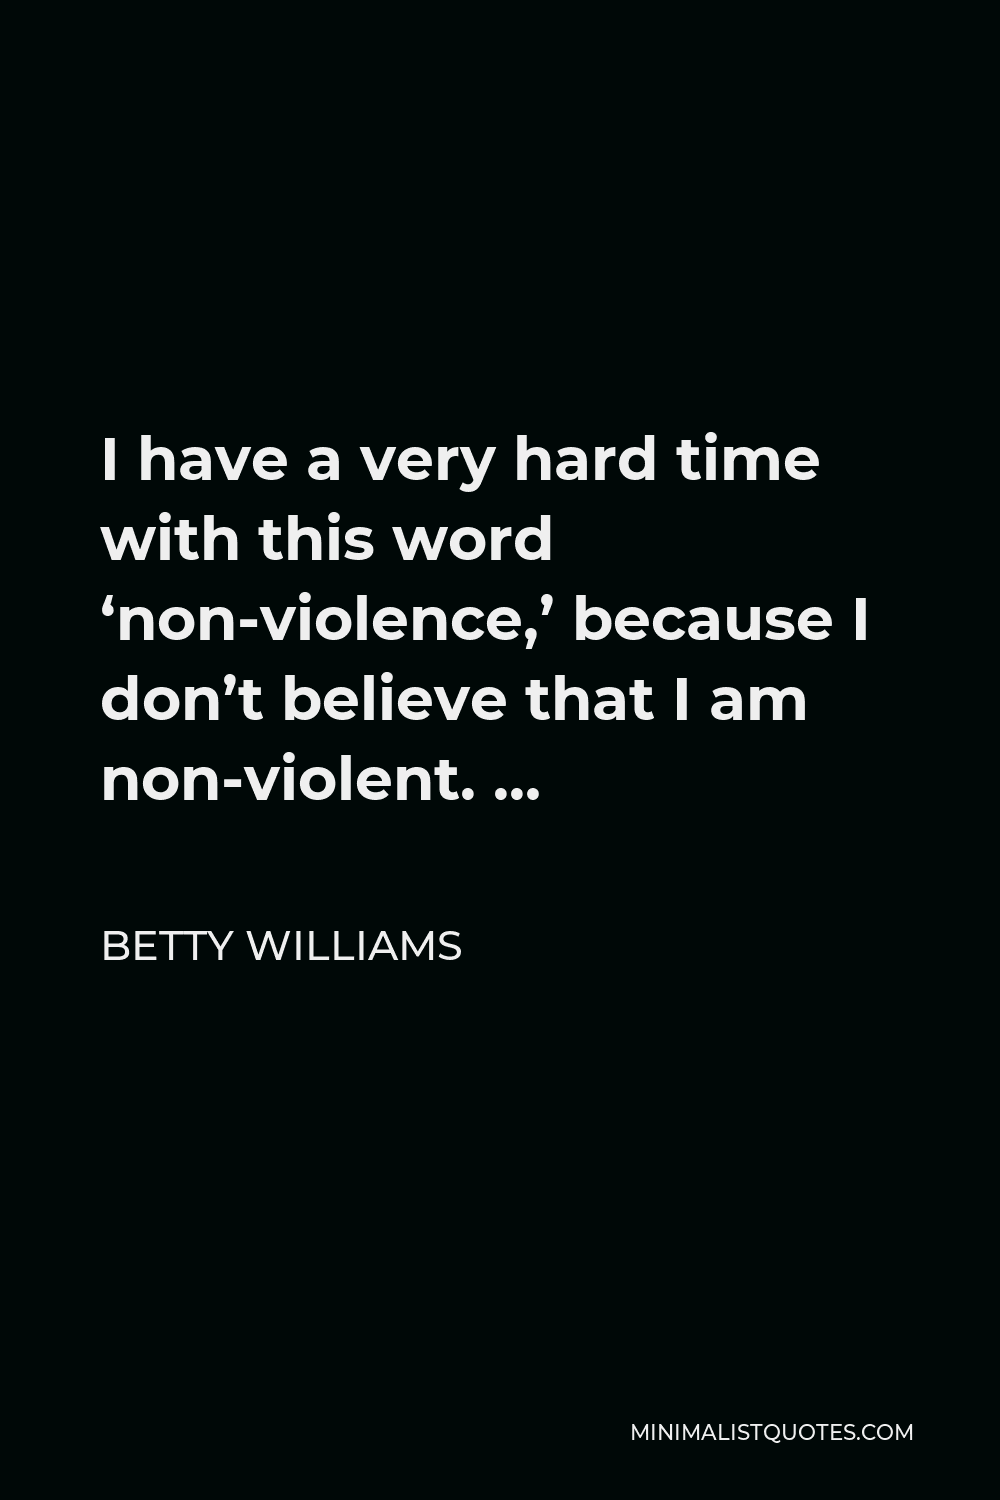 Betty Williams Quote - I have a very hard time with this word ‘non-violence,’ because I don’t believe that I am non-violent. …